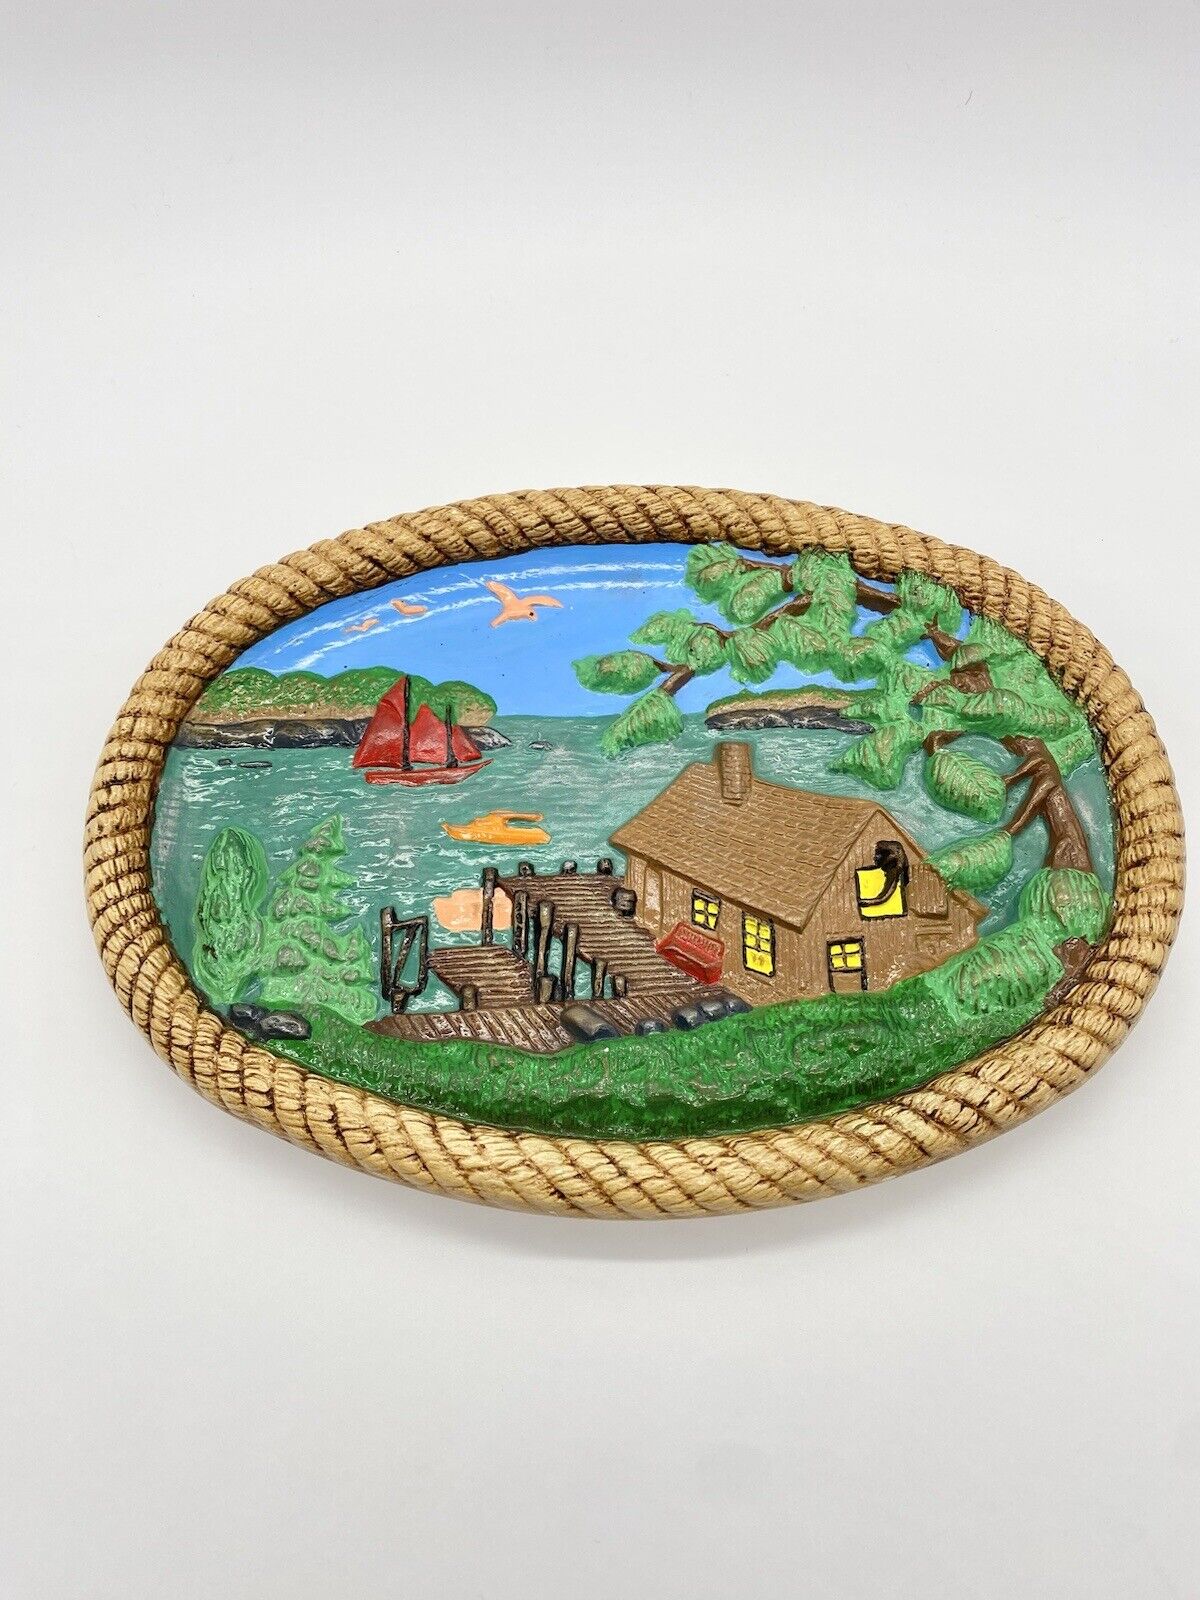 Vtg 1981 Hershey Molds 3D Diorama Wall Plaque Cabin on Lake Scene Hand Painted